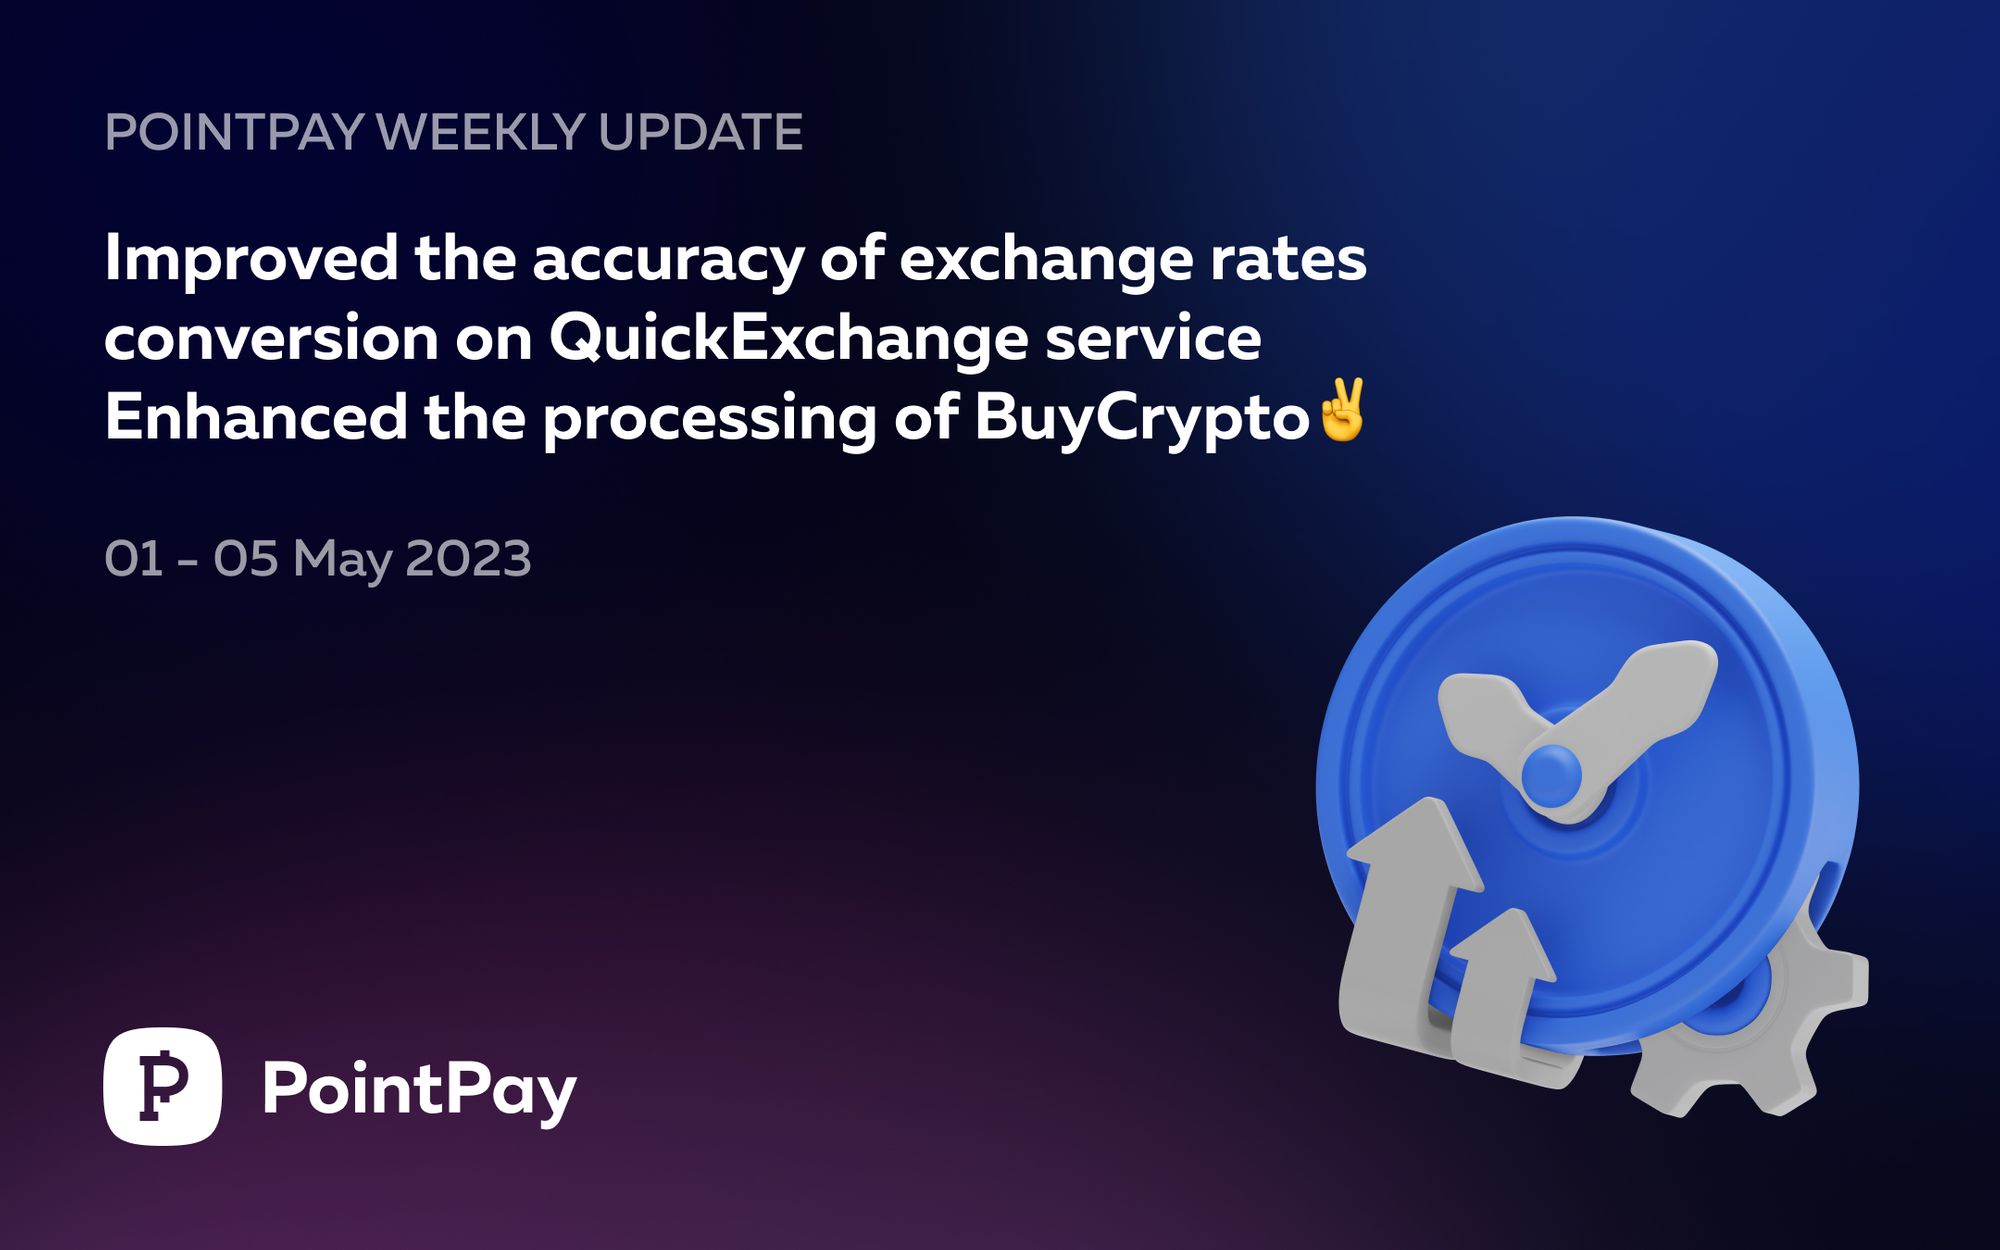 PointPay Weekly Update (1 - 5 May 2023)